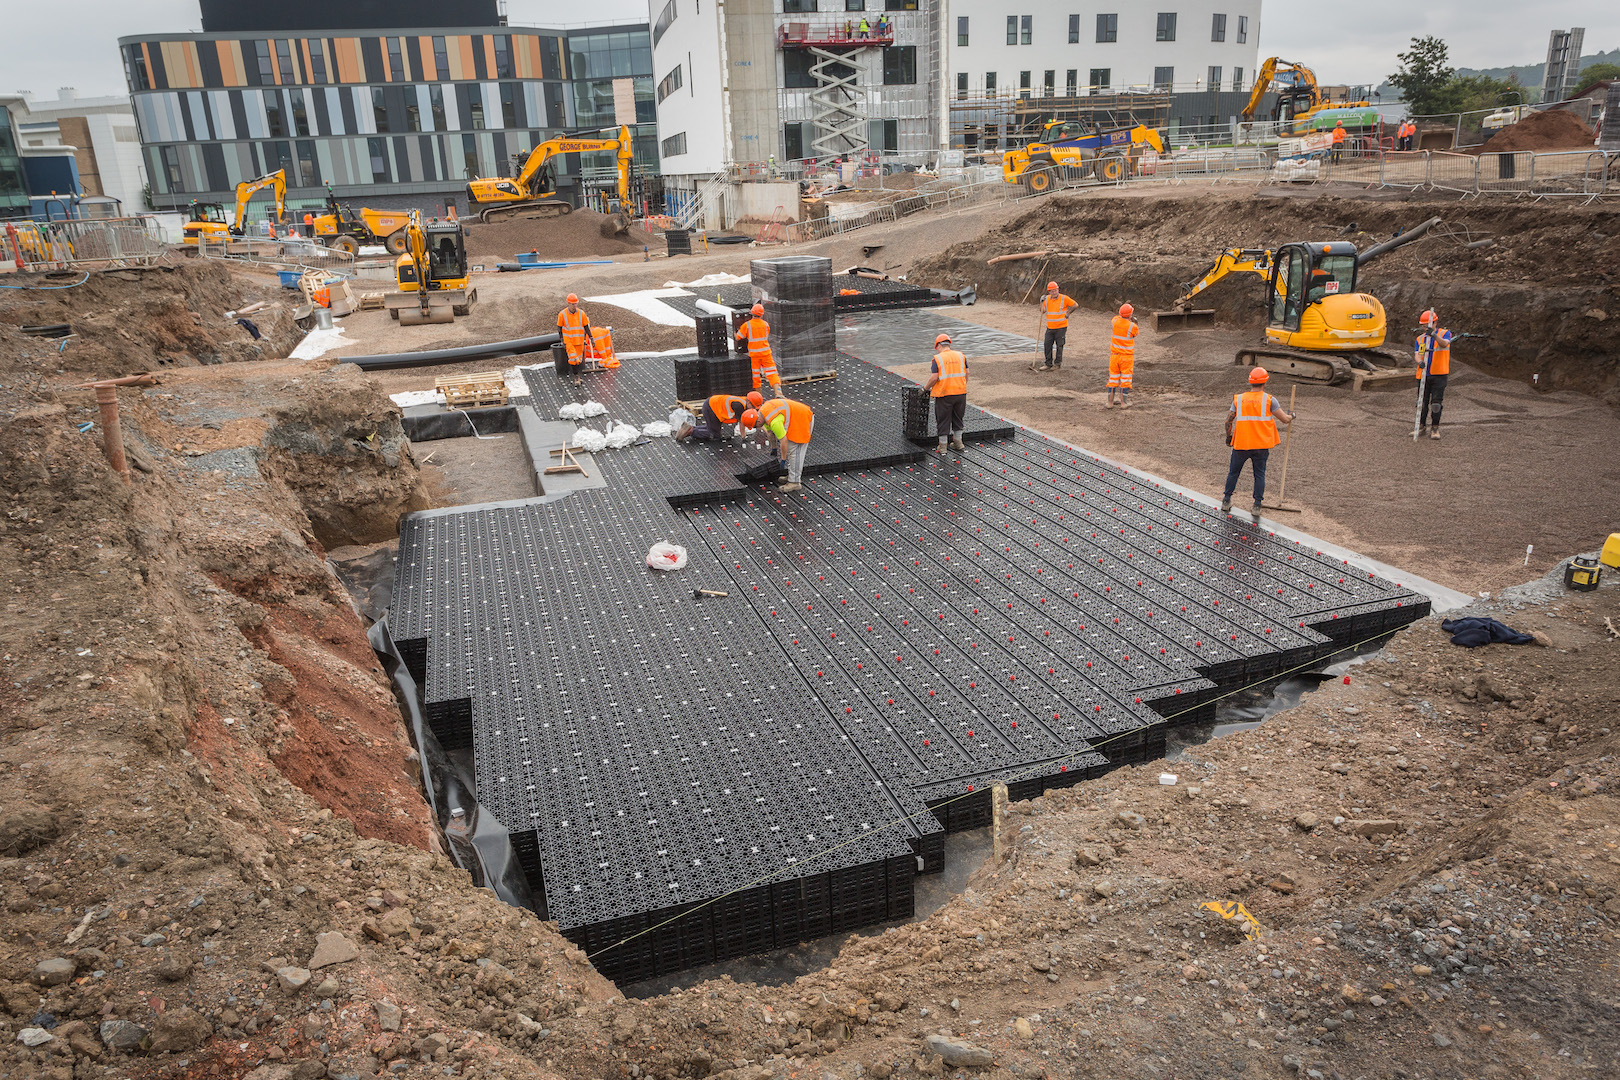 New £150m children’s hospital uses Polypipe for water attenuation system